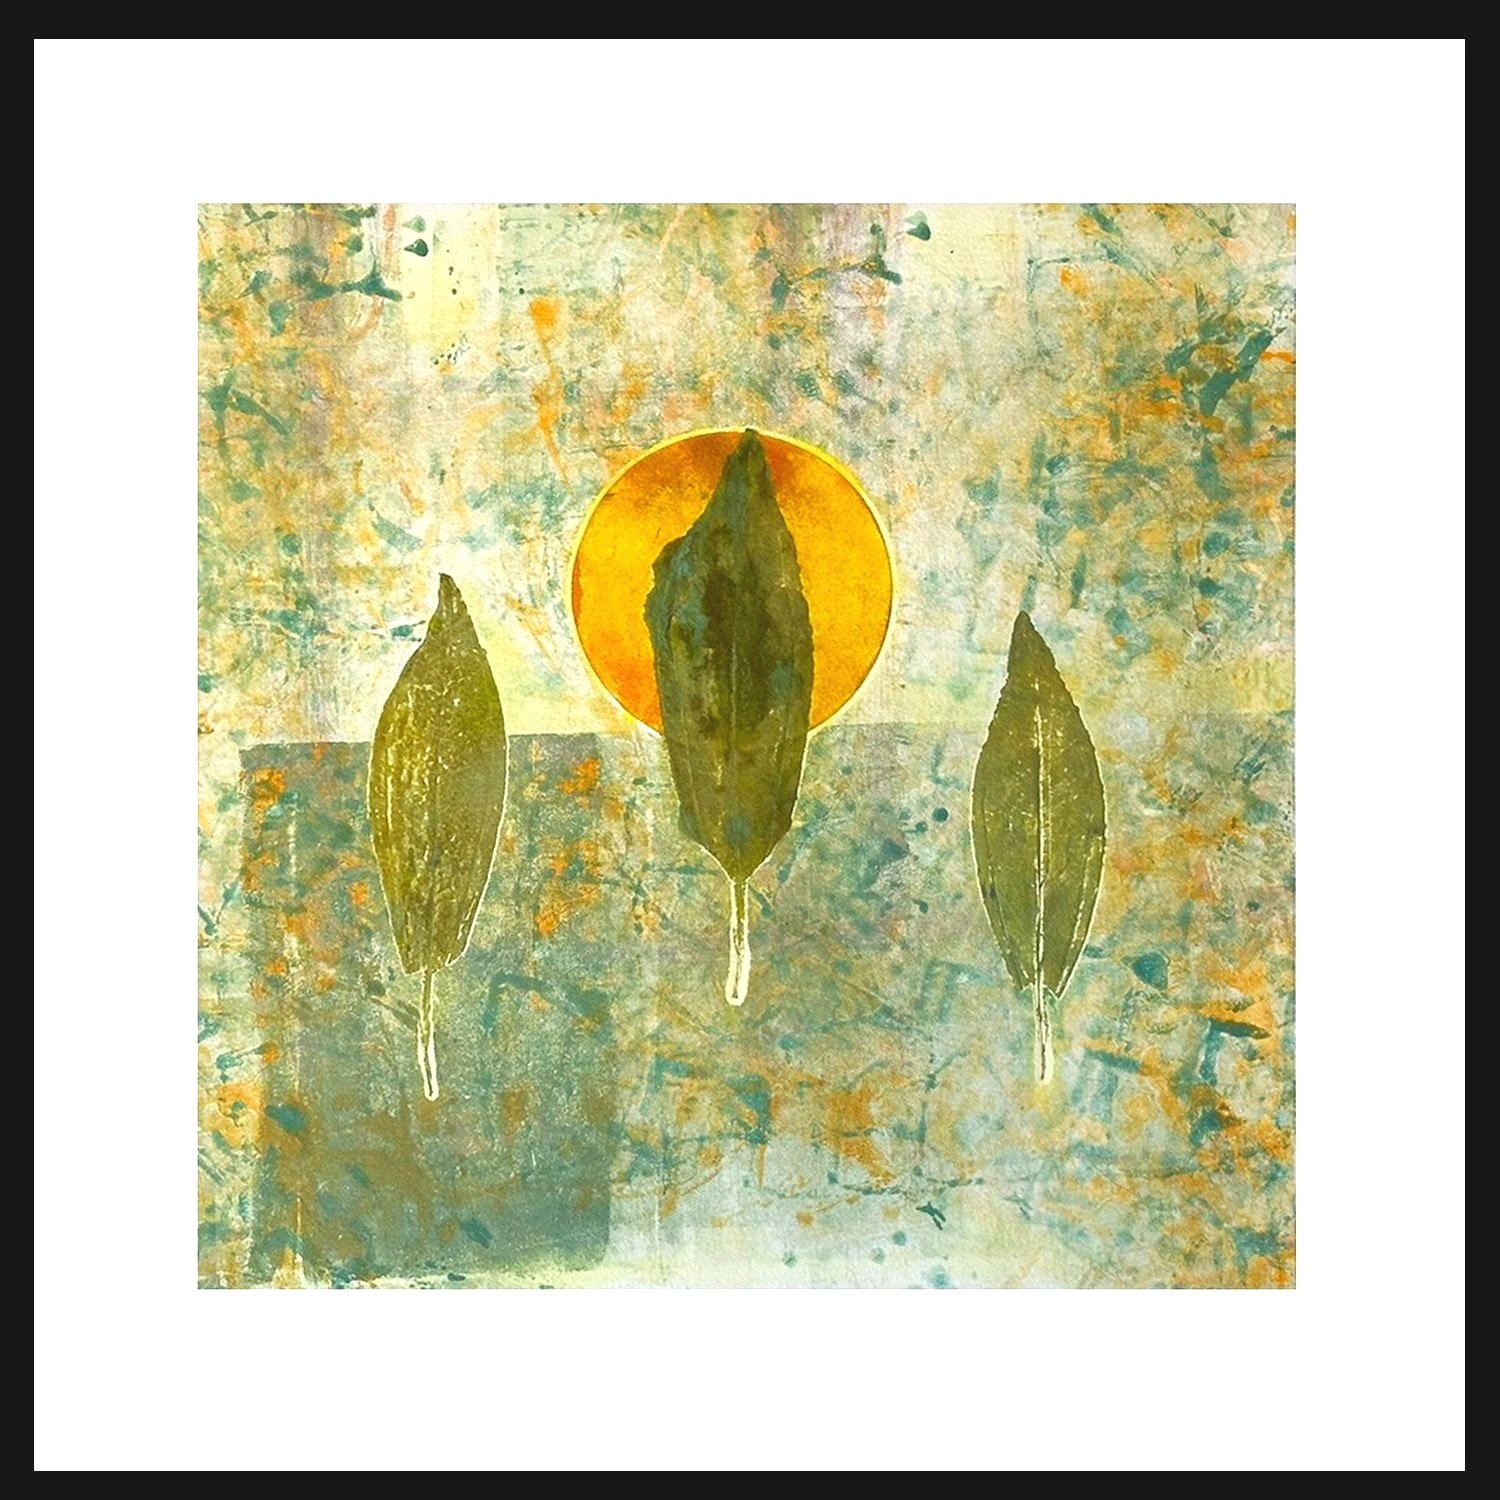   "Quiet Confidence"  is a unique monotype, with a plate size of 12 x 12 inches. It is elegantly matted and presented in a slender, complementary gold metal frame, measuring 20 x 19.75 inches. Radiating brightness and cheerfulness, this artwork is a 